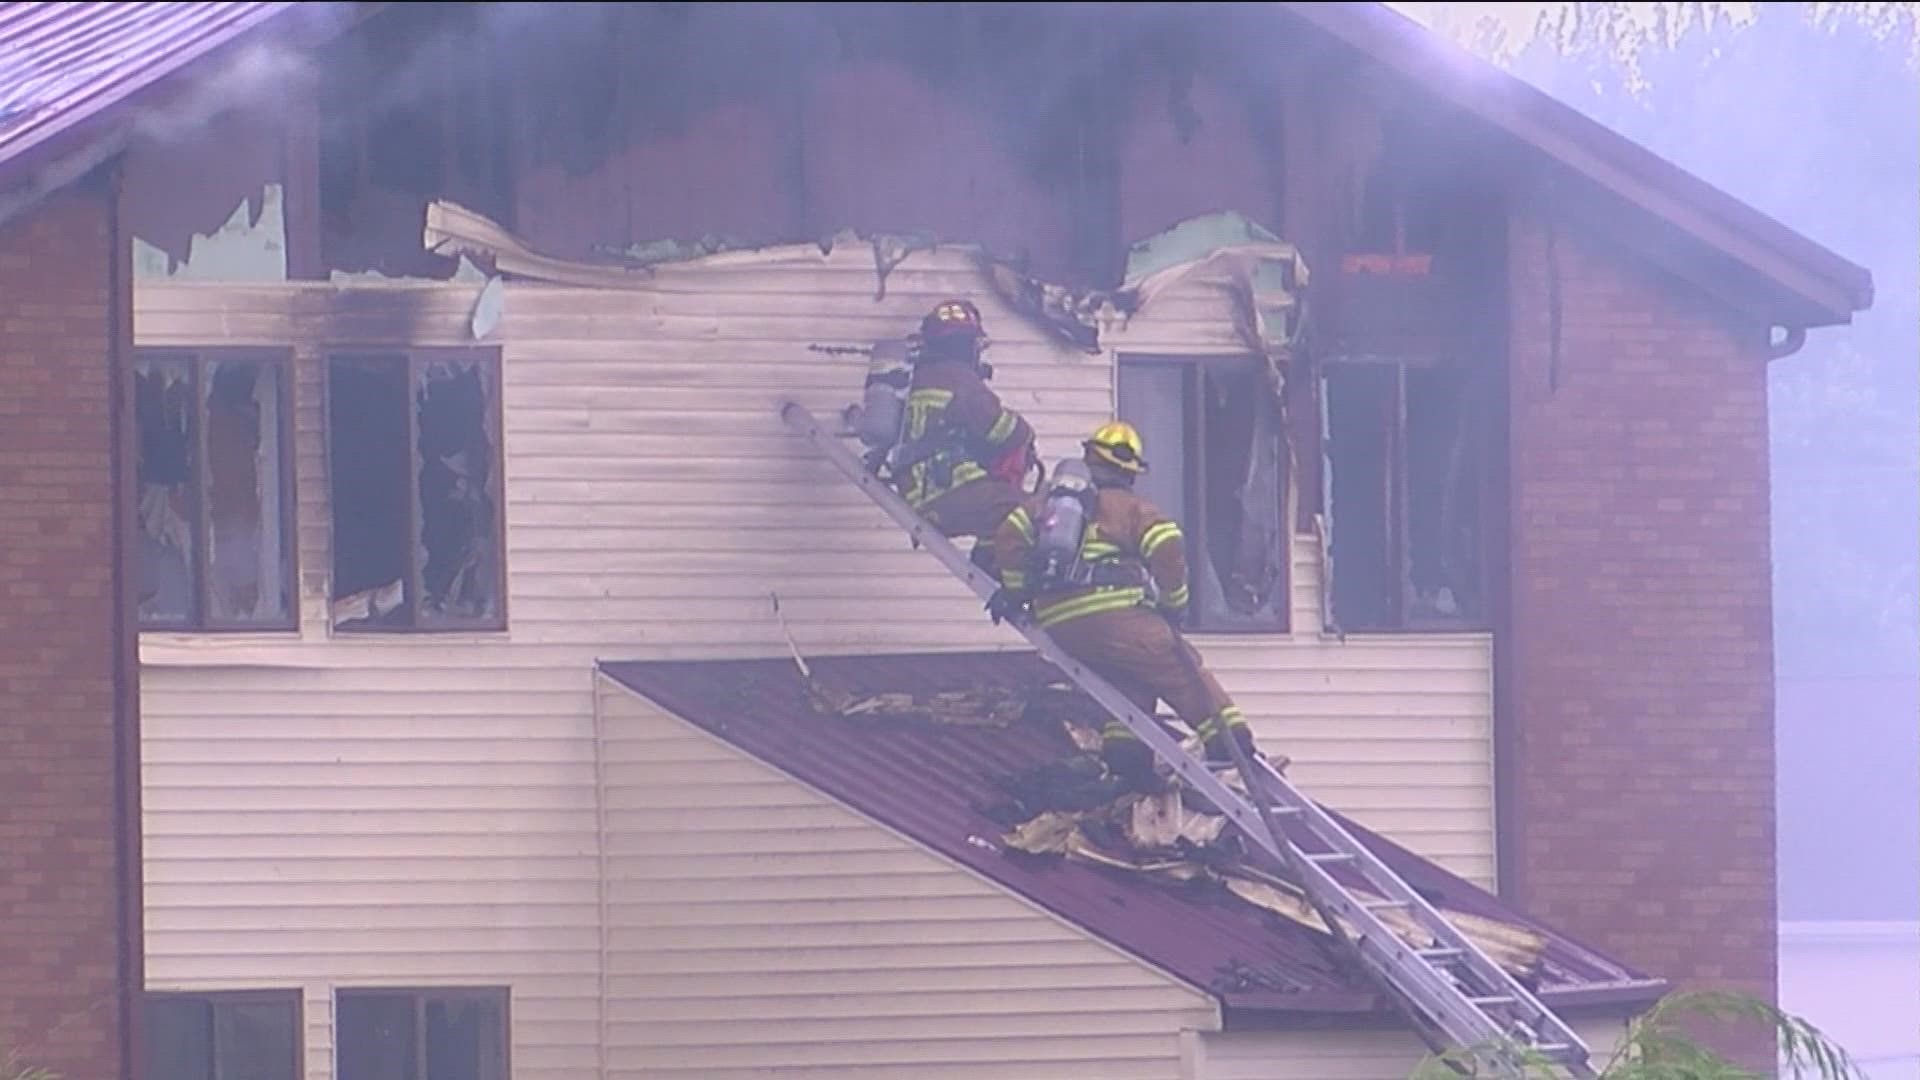 There are no reports of injuries among residents and firefighters. The east side of the building is a total loss.